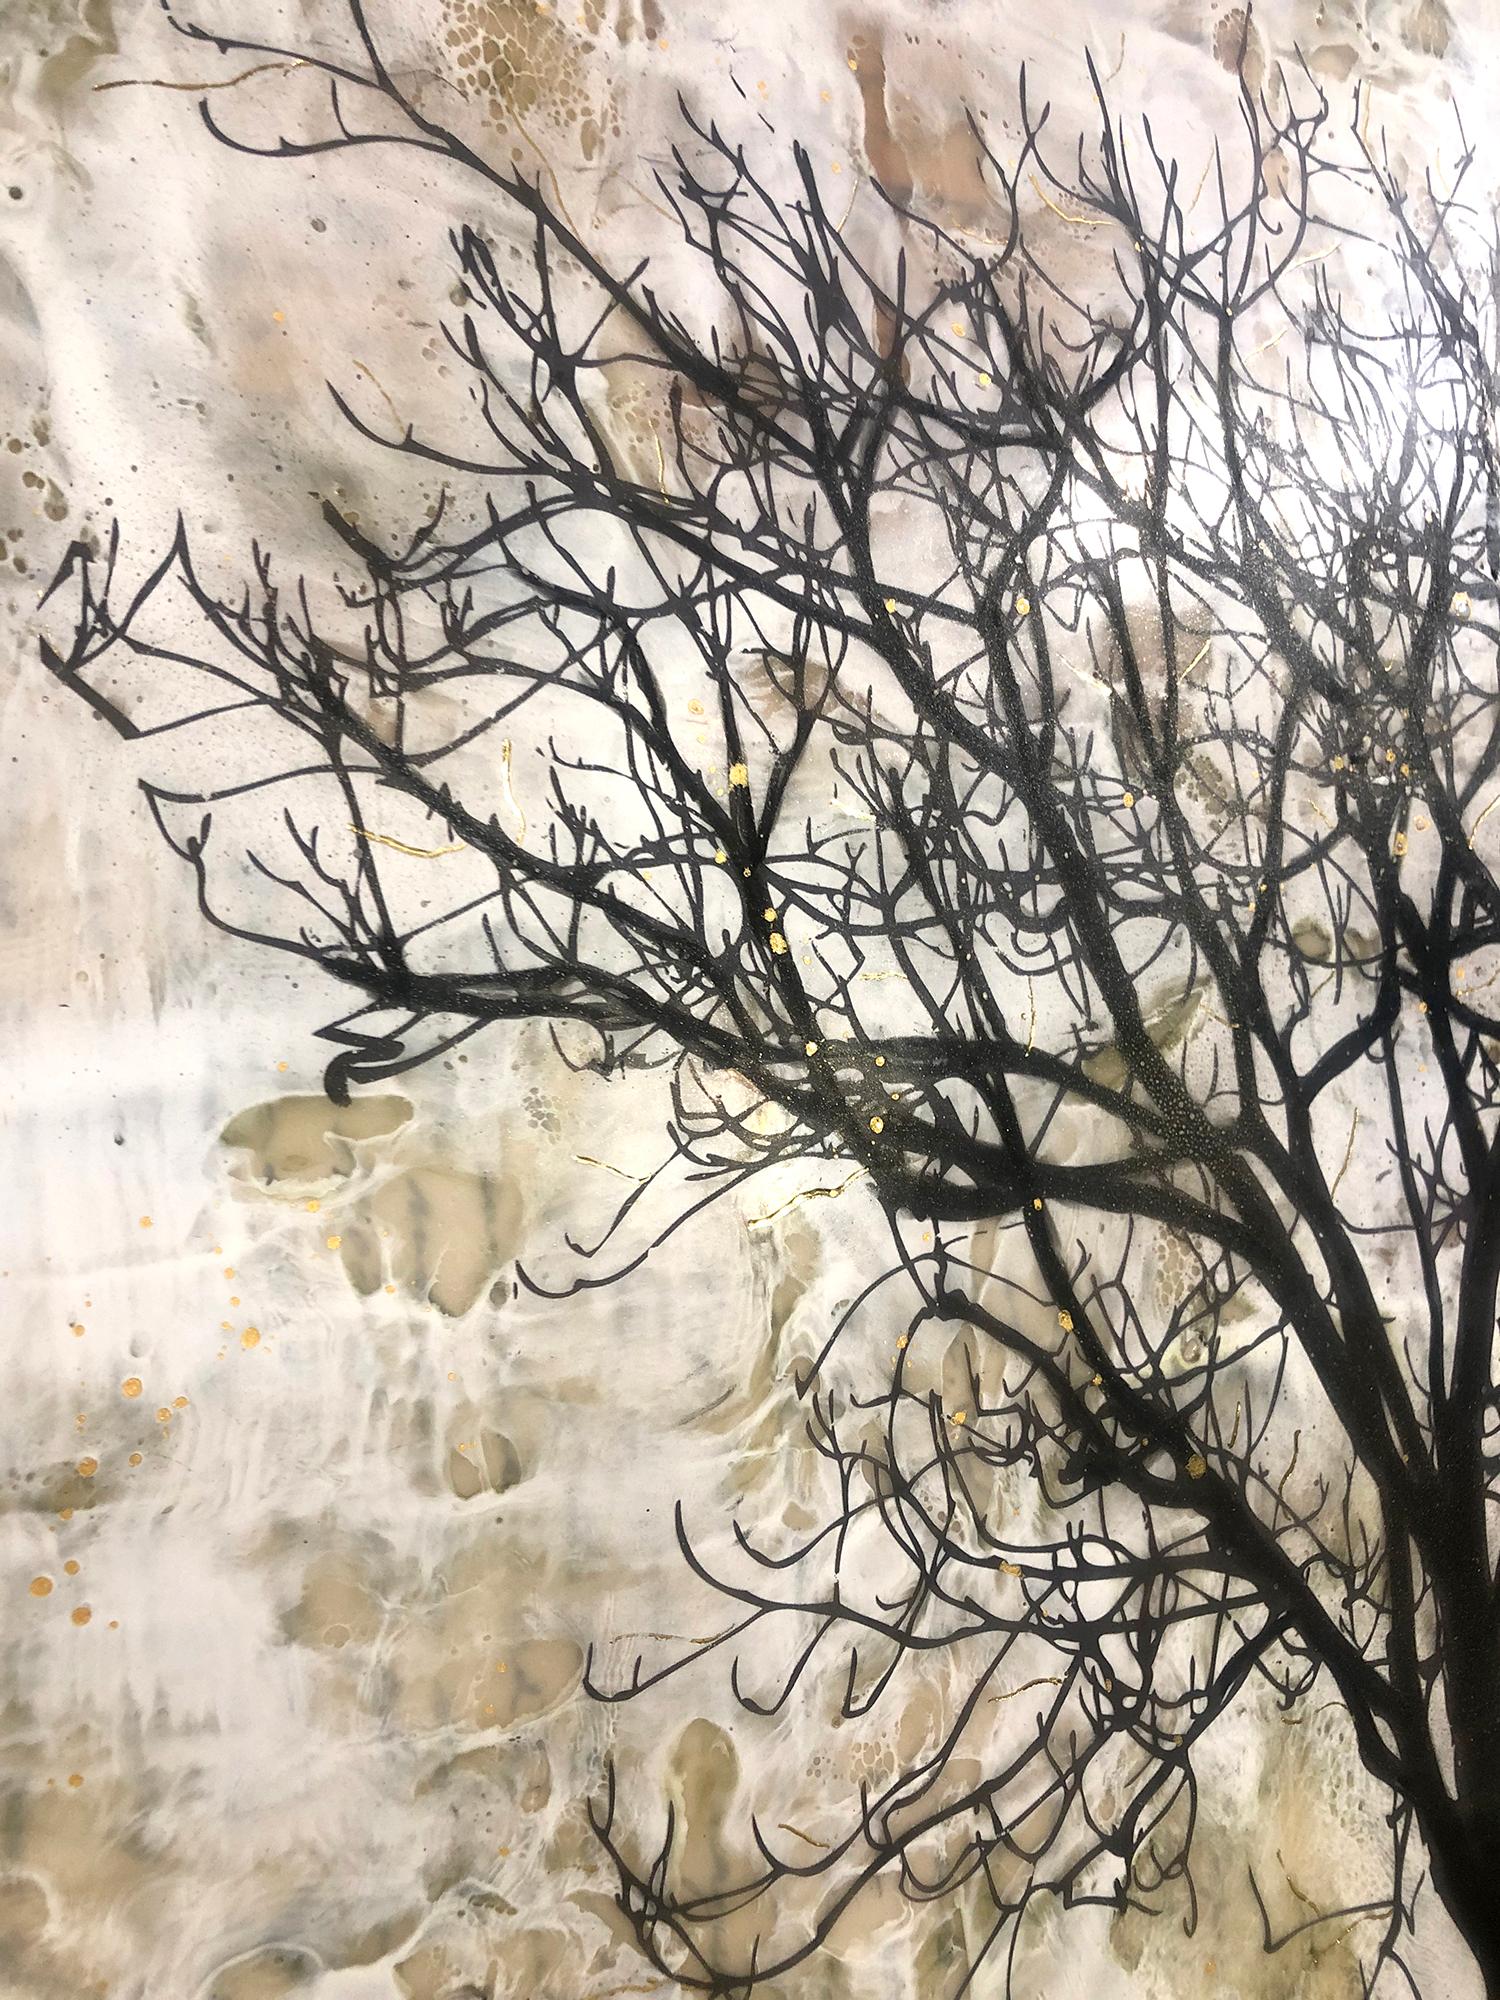 <p>Artist Comments<br>Solitude and strength come to mind with this mixed media encaustic piece by artist Shannon Amidon. A winter tree silhouette stands in the center of the heavily graveled field. Shannon makes up the background with various